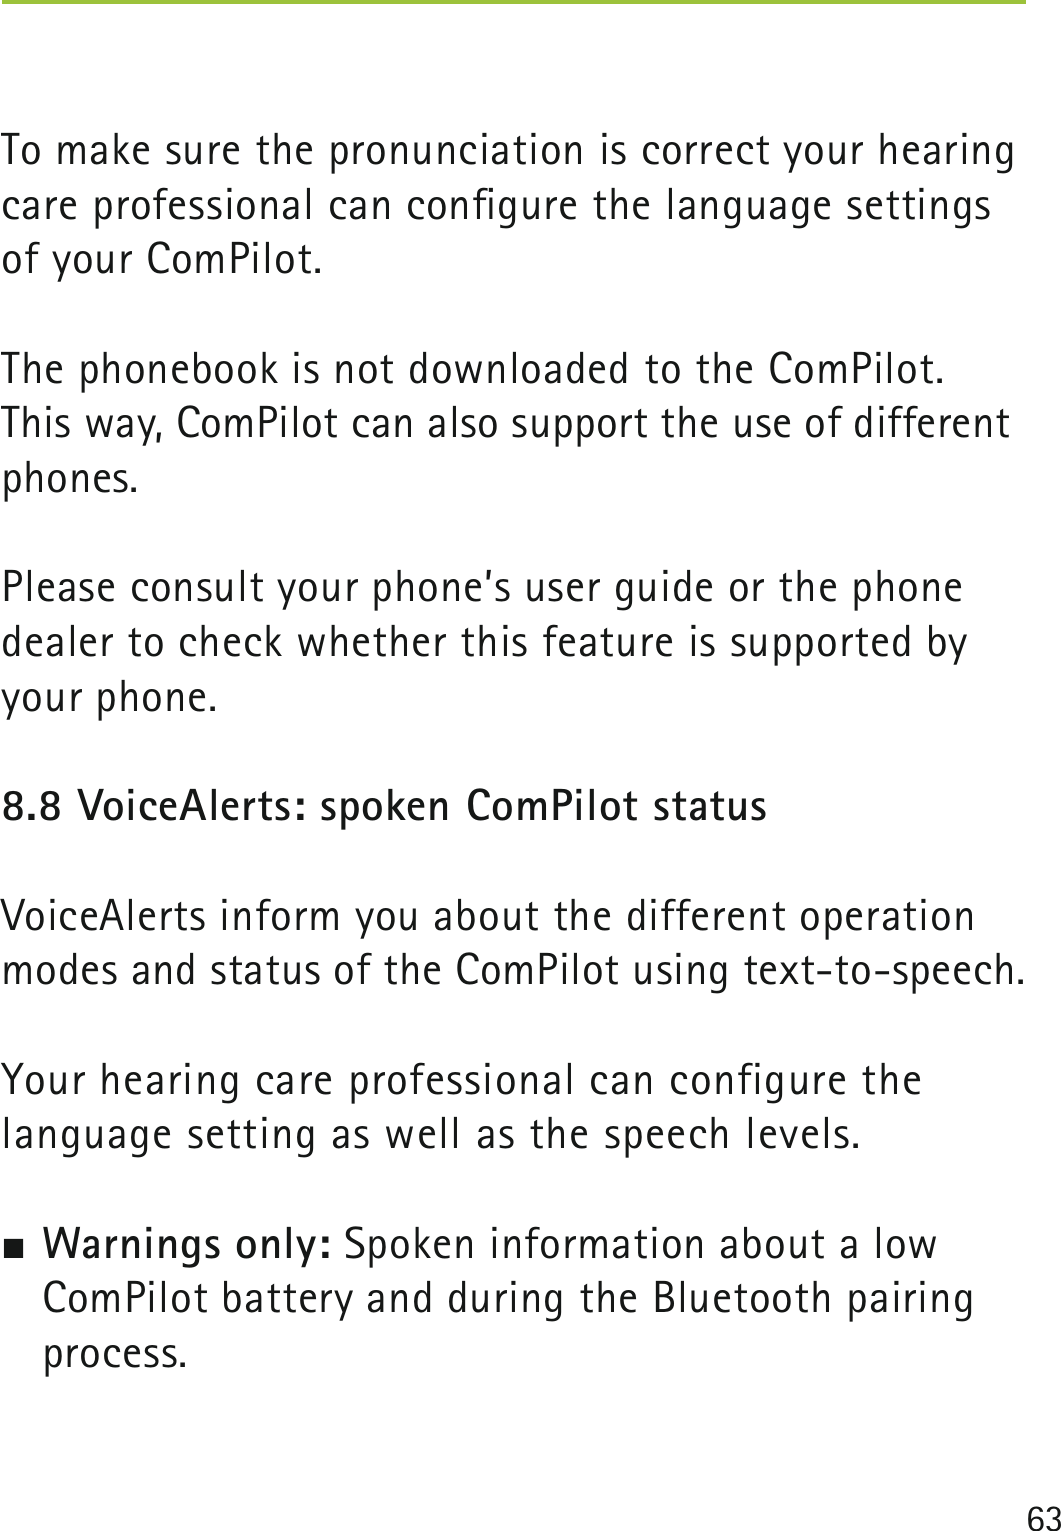 63To make sure the pronunciation is correct your hearing care professional can conﬁgure the language settings of your ComPilot.The phonebook is not downloaded to the ComPilot. This way, ComPilot can also support the use of different phones.Please consult your phone’s user guide or the phone dealer to check whether this feature is supported by your phone.8.8 VoiceAlerts: spoken ComPilot statusVoiceAlerts inform you about the different operation modes and status of the ComPilot using text-to-speech.Your hearing care professional can configure the  language setting as well as the speech levels. Warnings only: Spoken information about a low ComPilot battery and during the Bluetooth pairing process. 